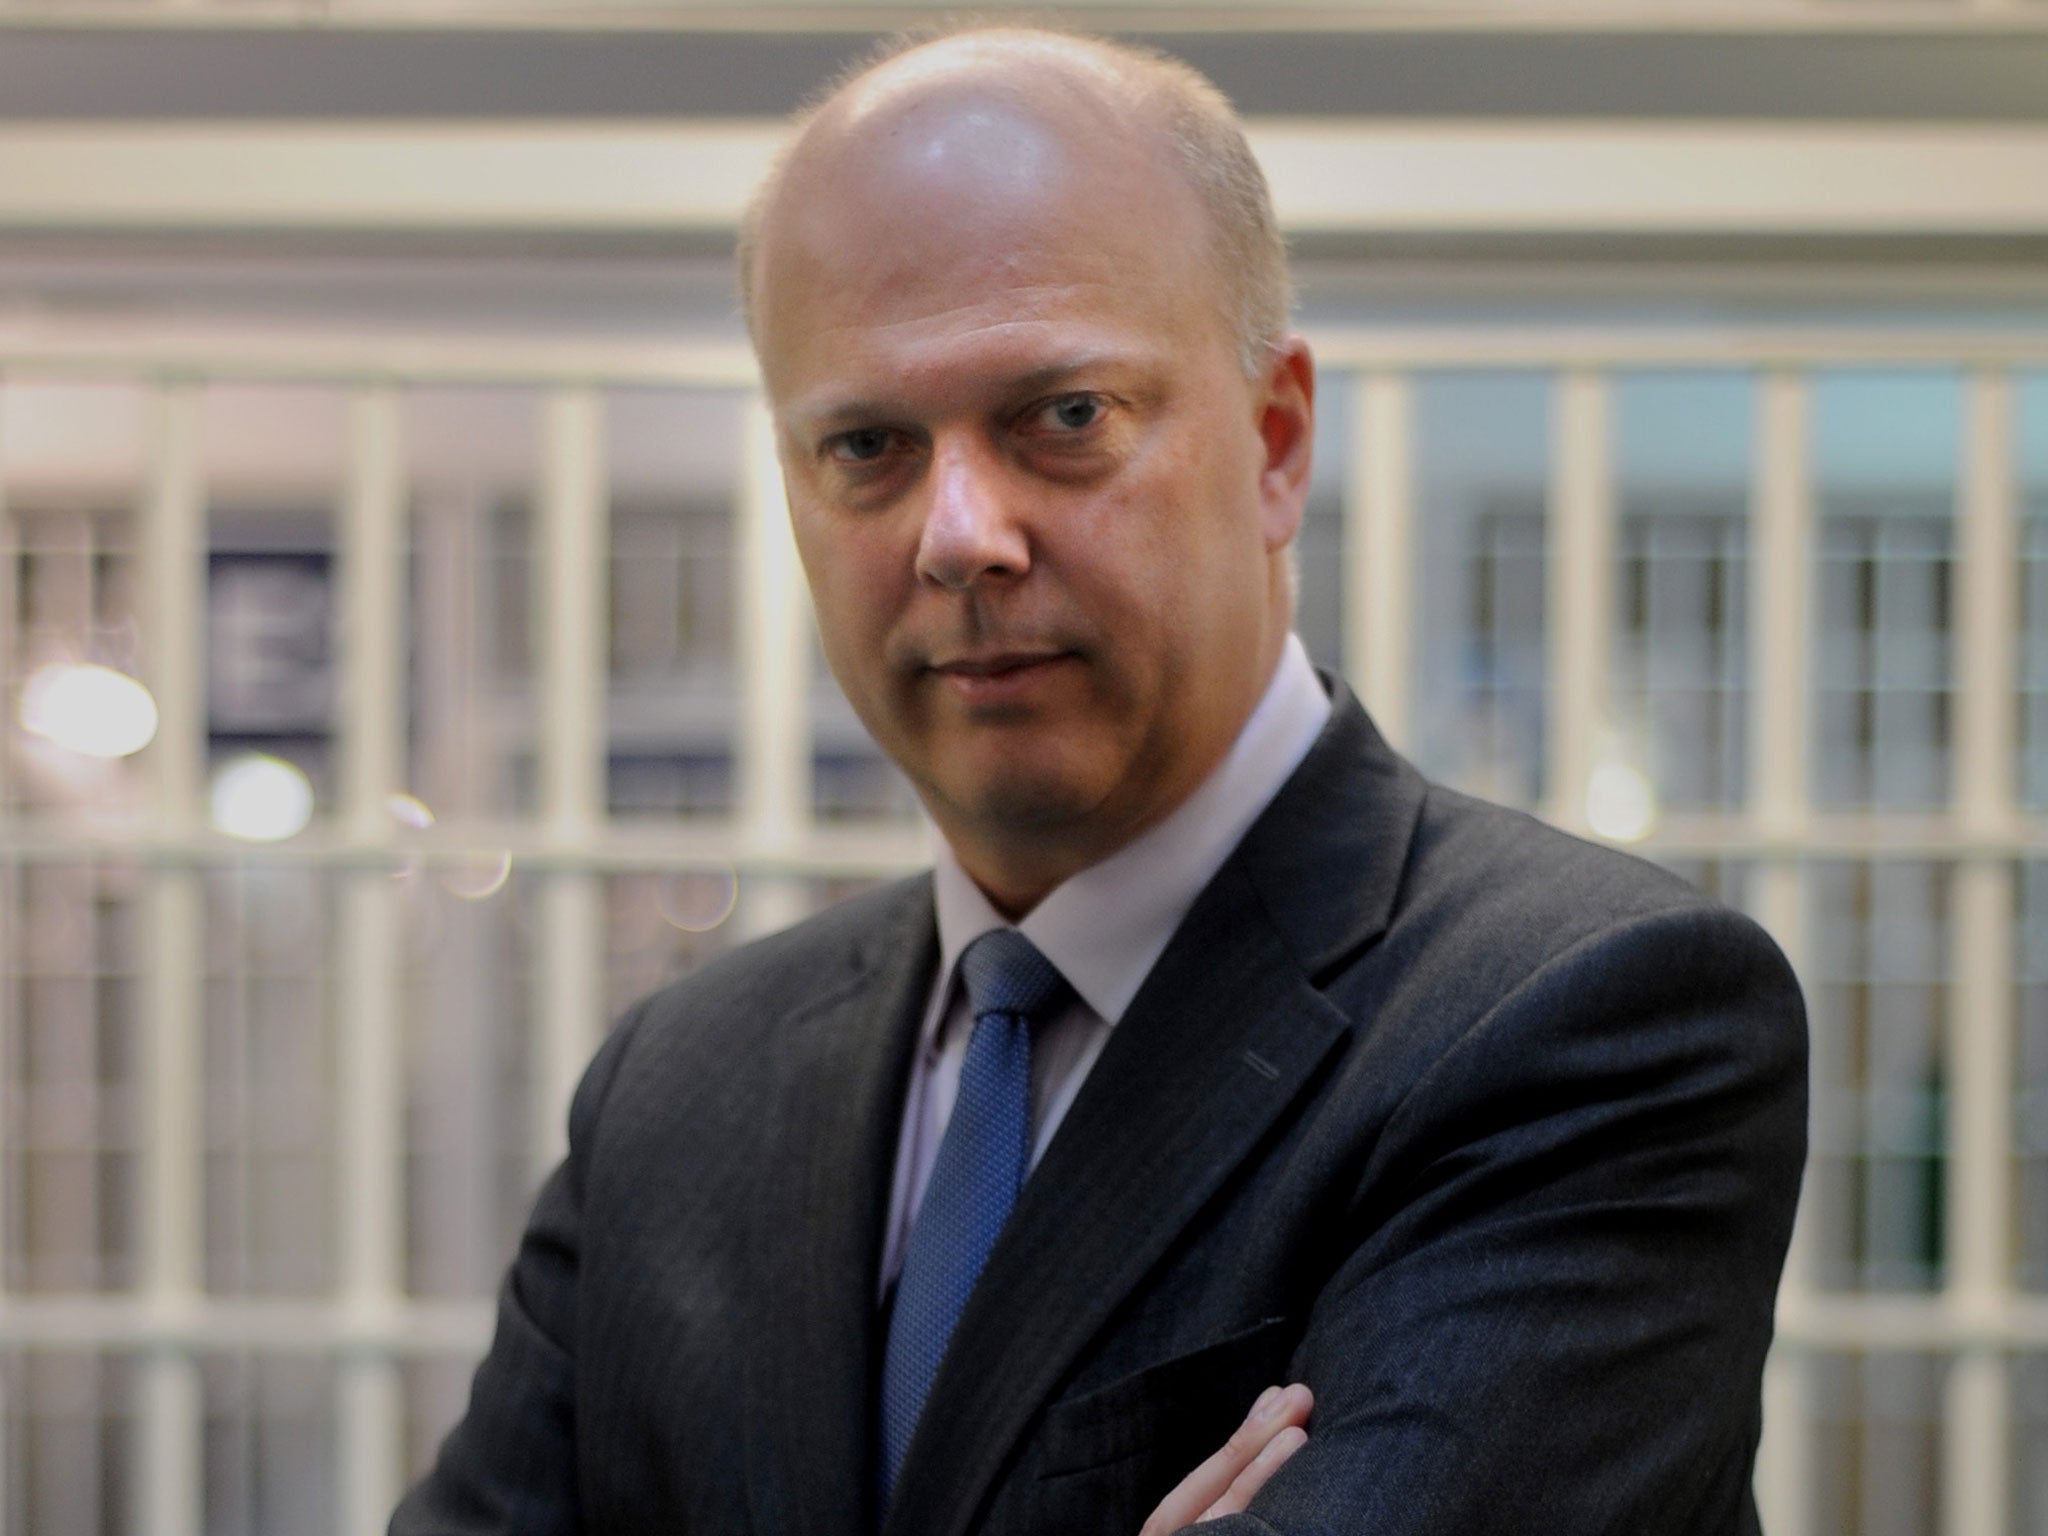 Chris Grayling: 'The Court of Protection has recently attracted media attention'